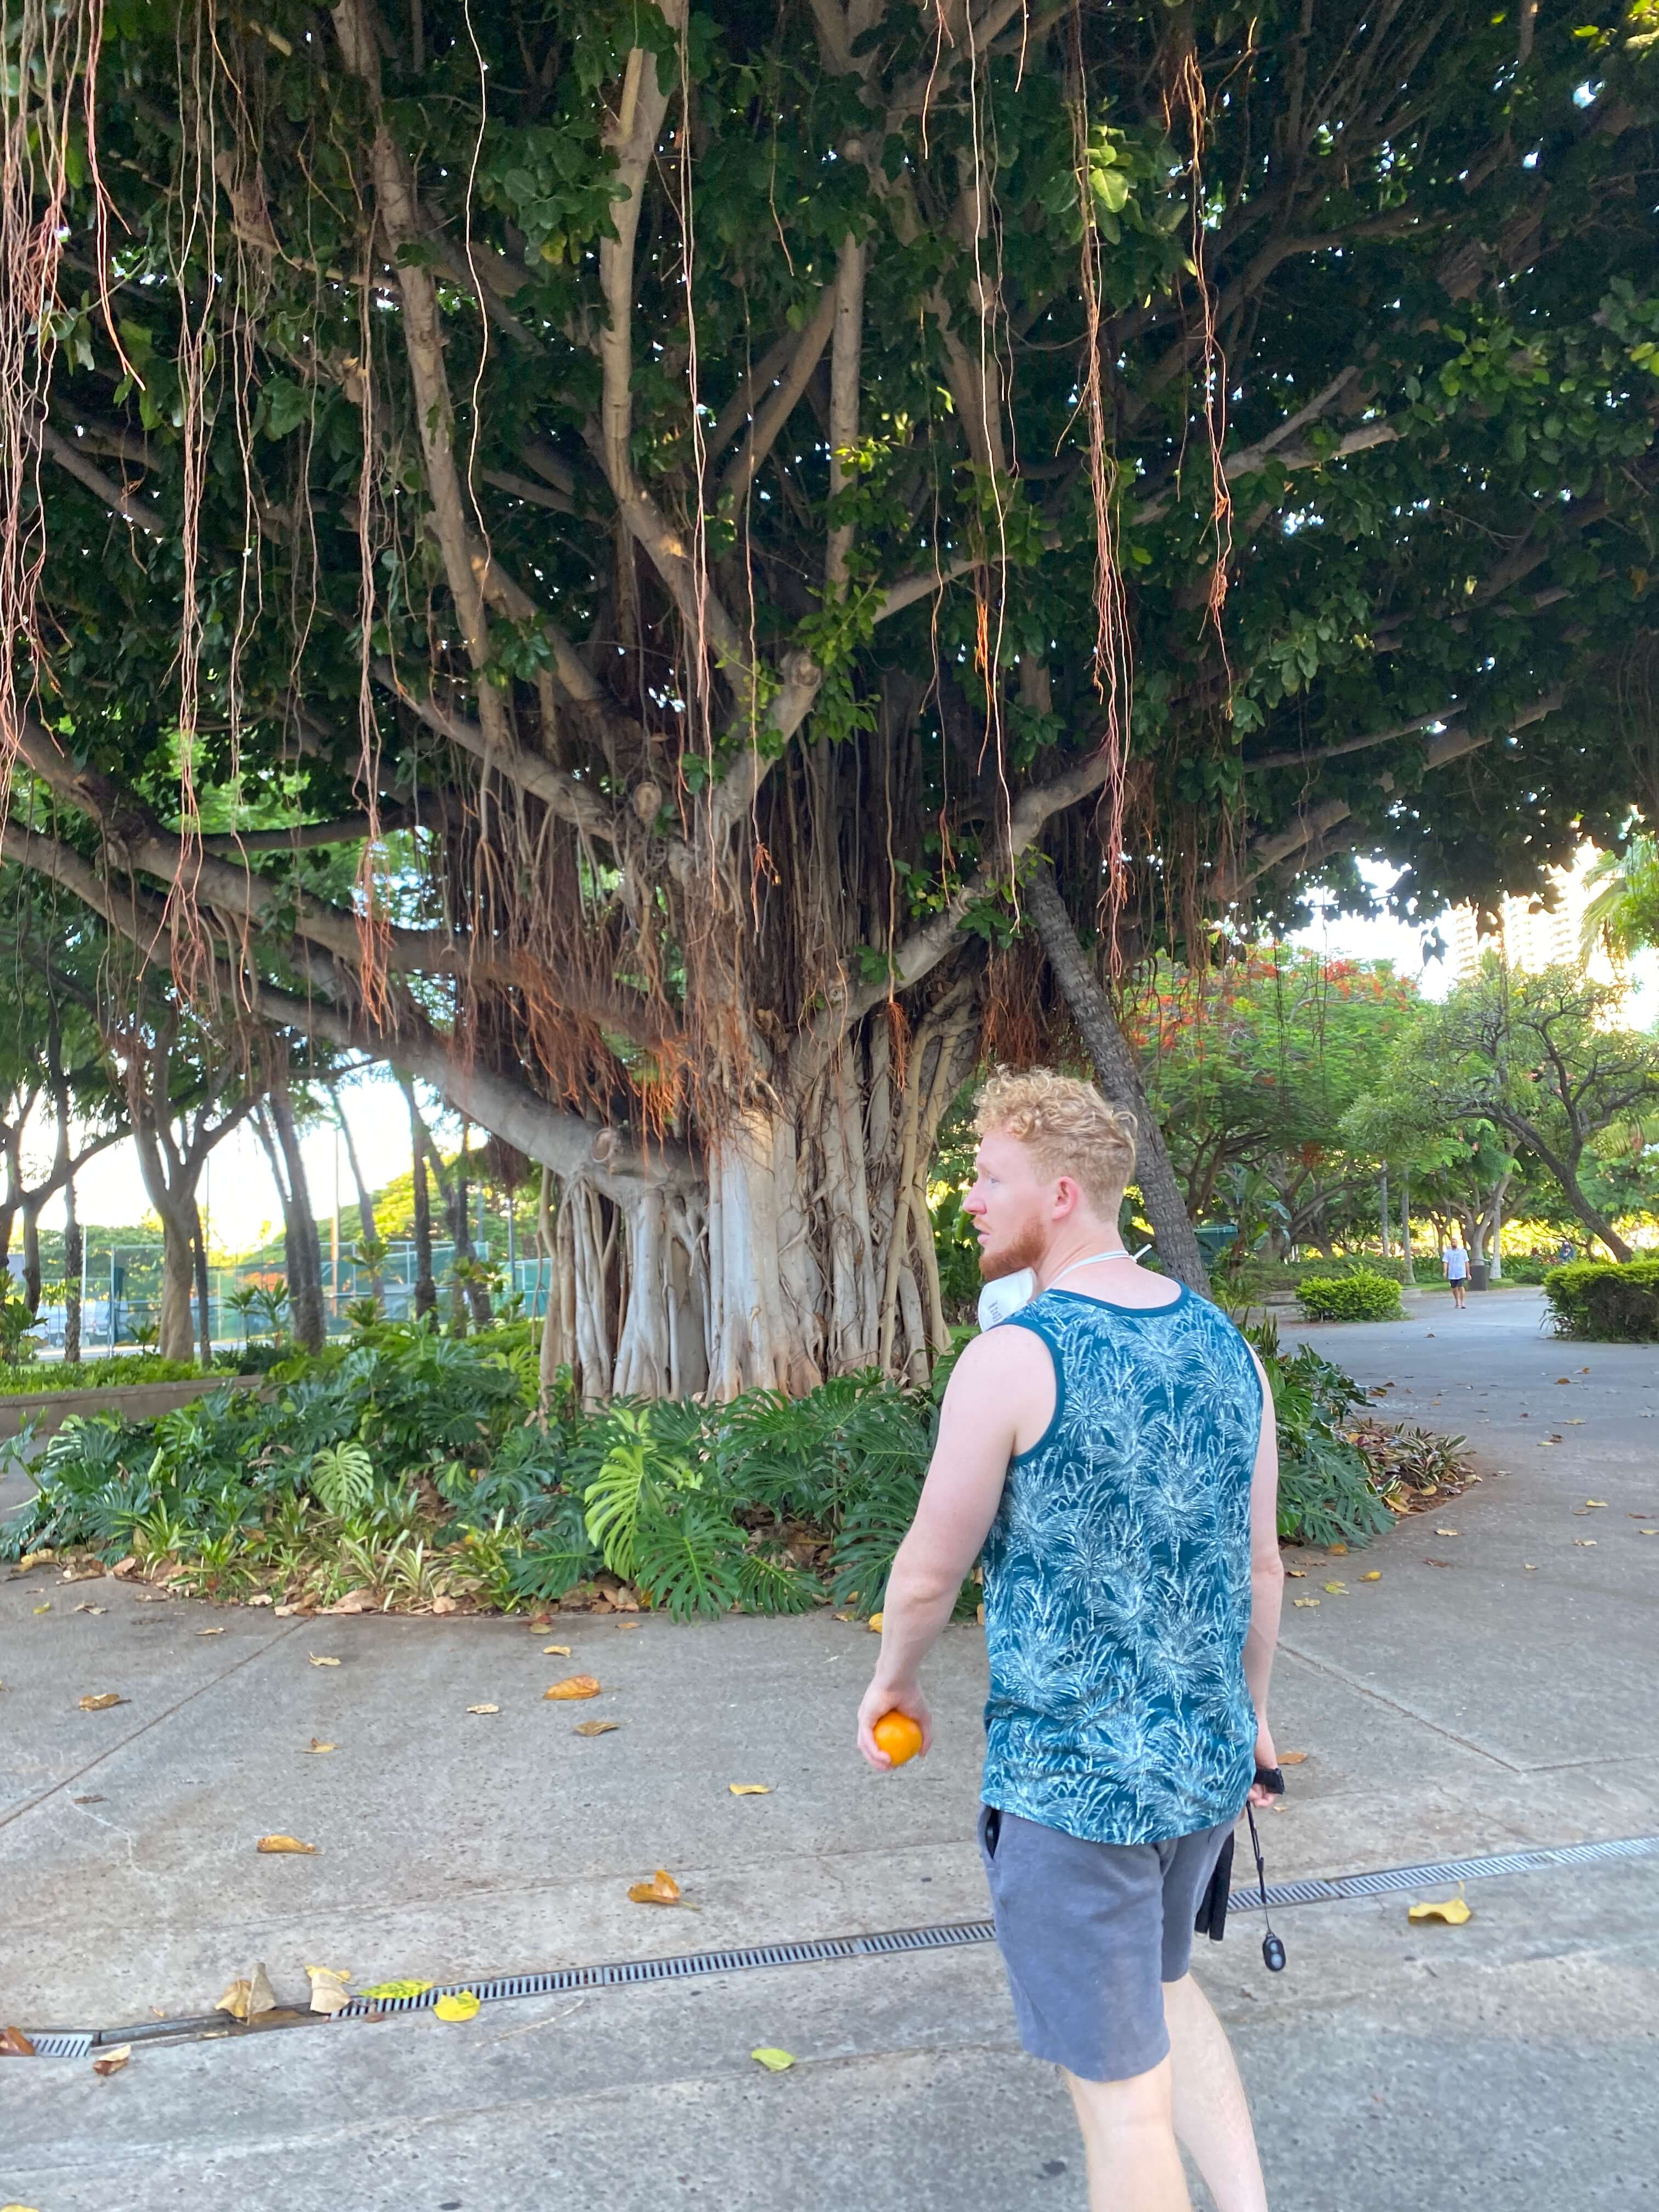 Tree with Vines in Hawaii